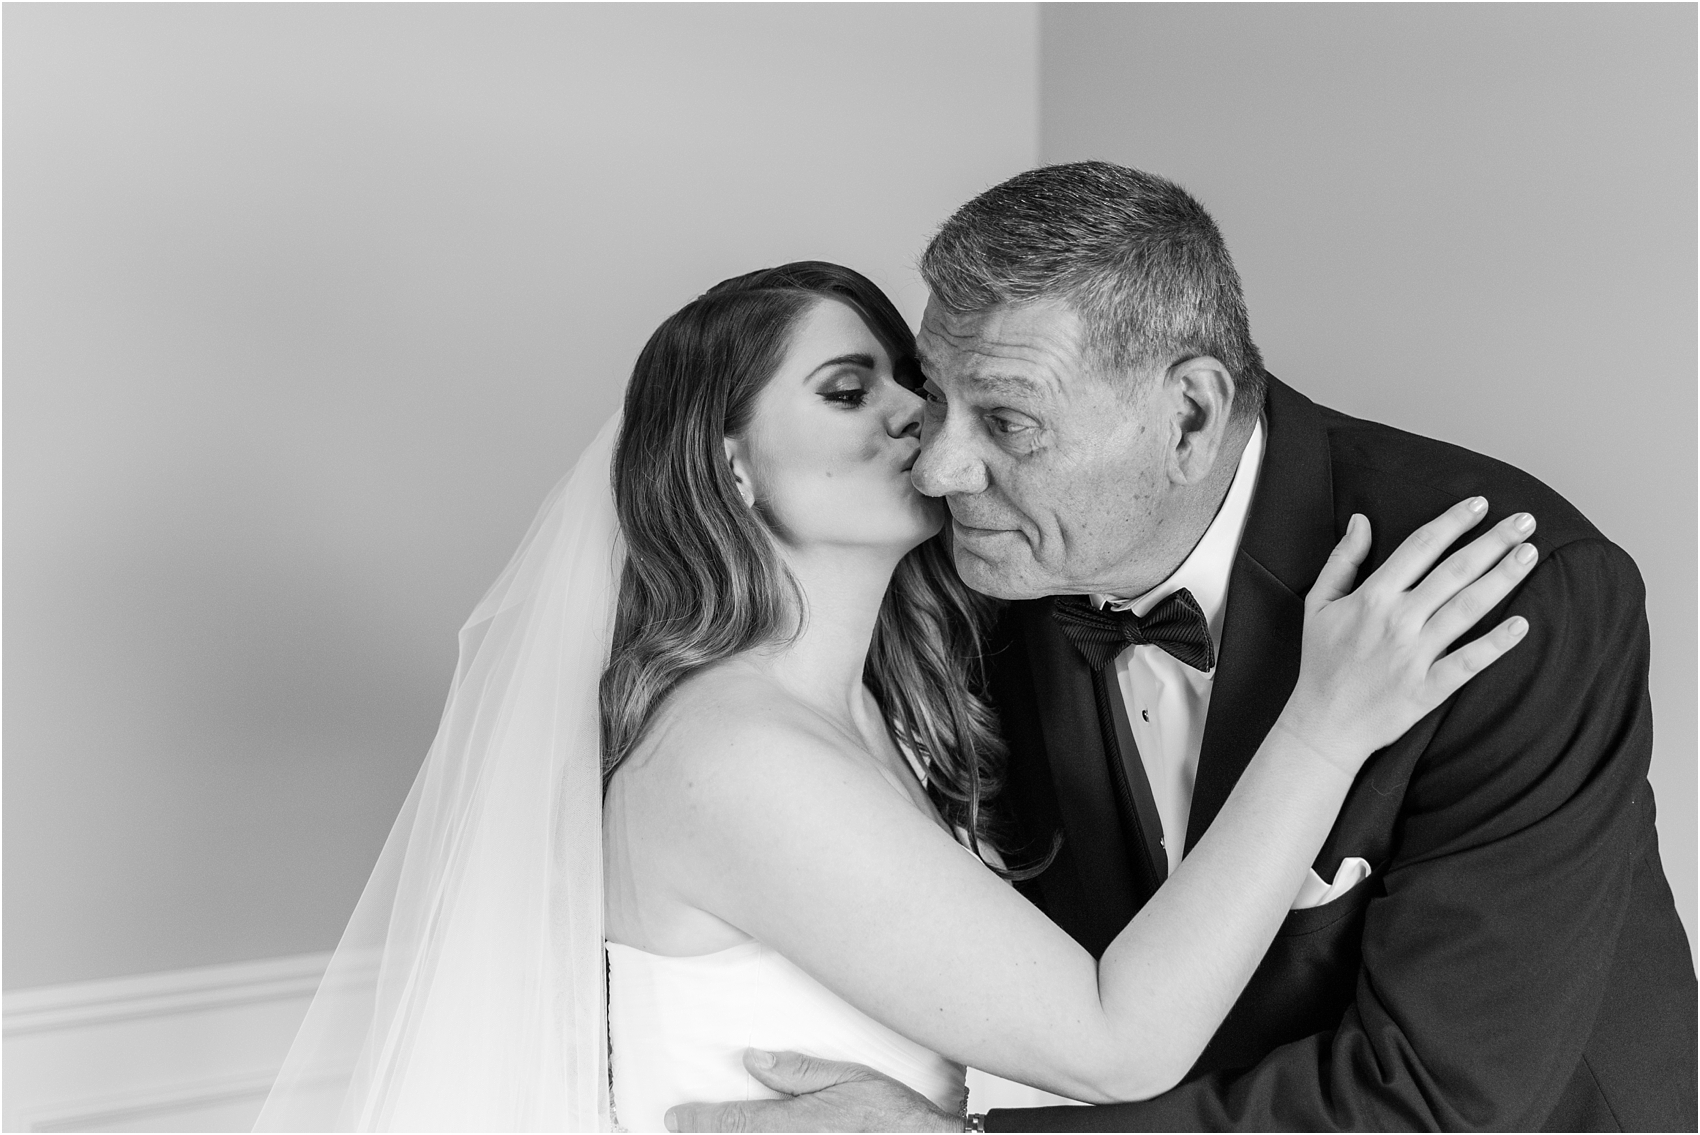 father-and-bride-share-emotional-first-look-on-wedding-day-photos-in-detroit-michigan-by-courtney-carolyn-photography_0021.jpg